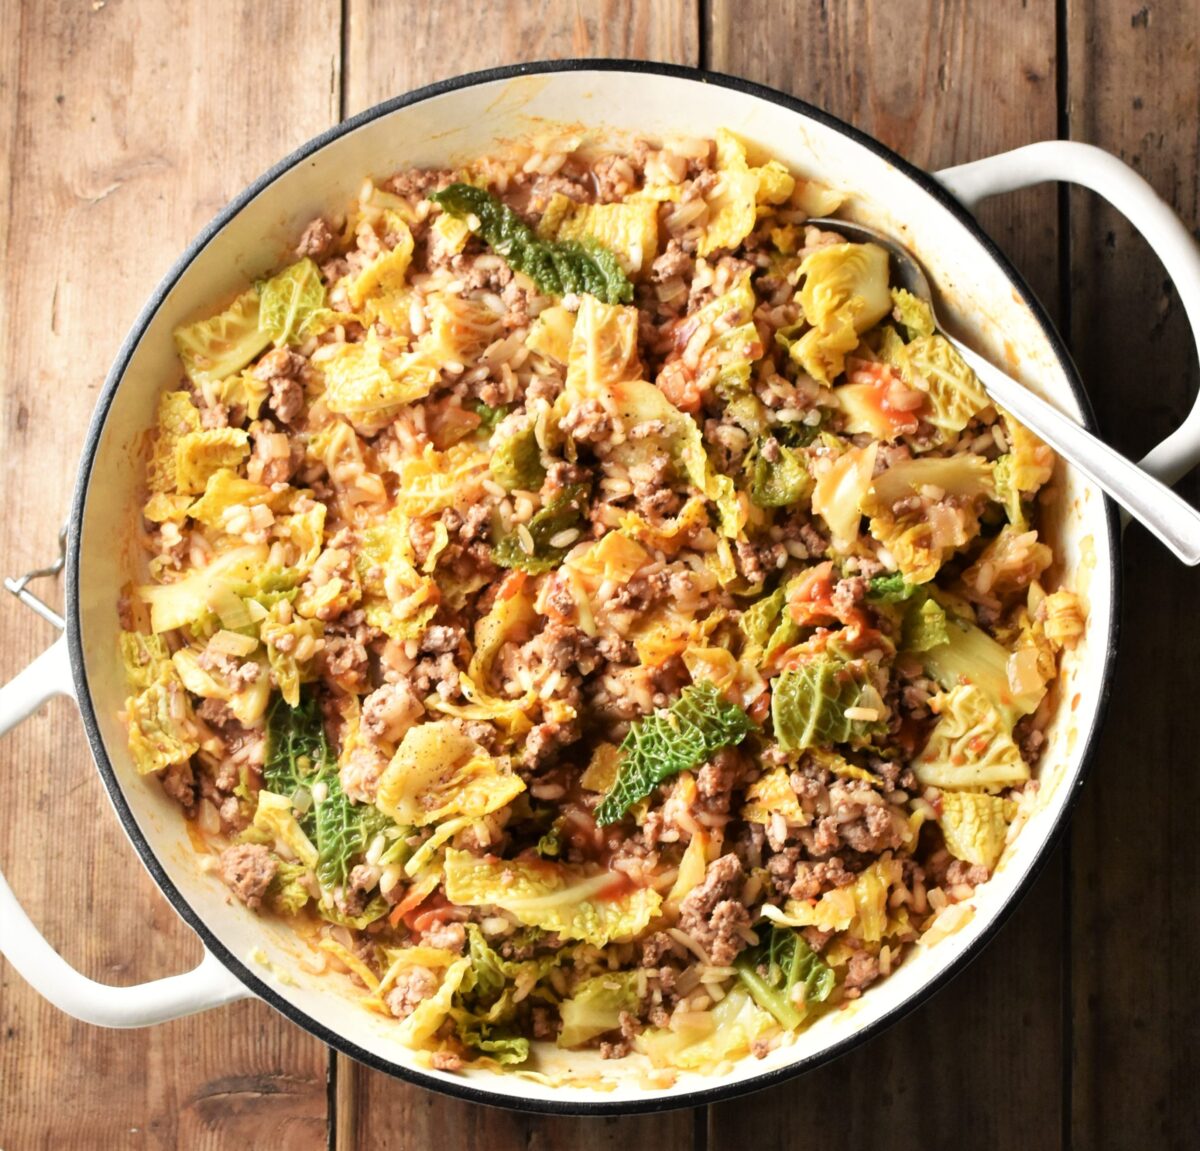 Chopped cabbage, ground meat and rice in large, shallow, white dish with spoon.